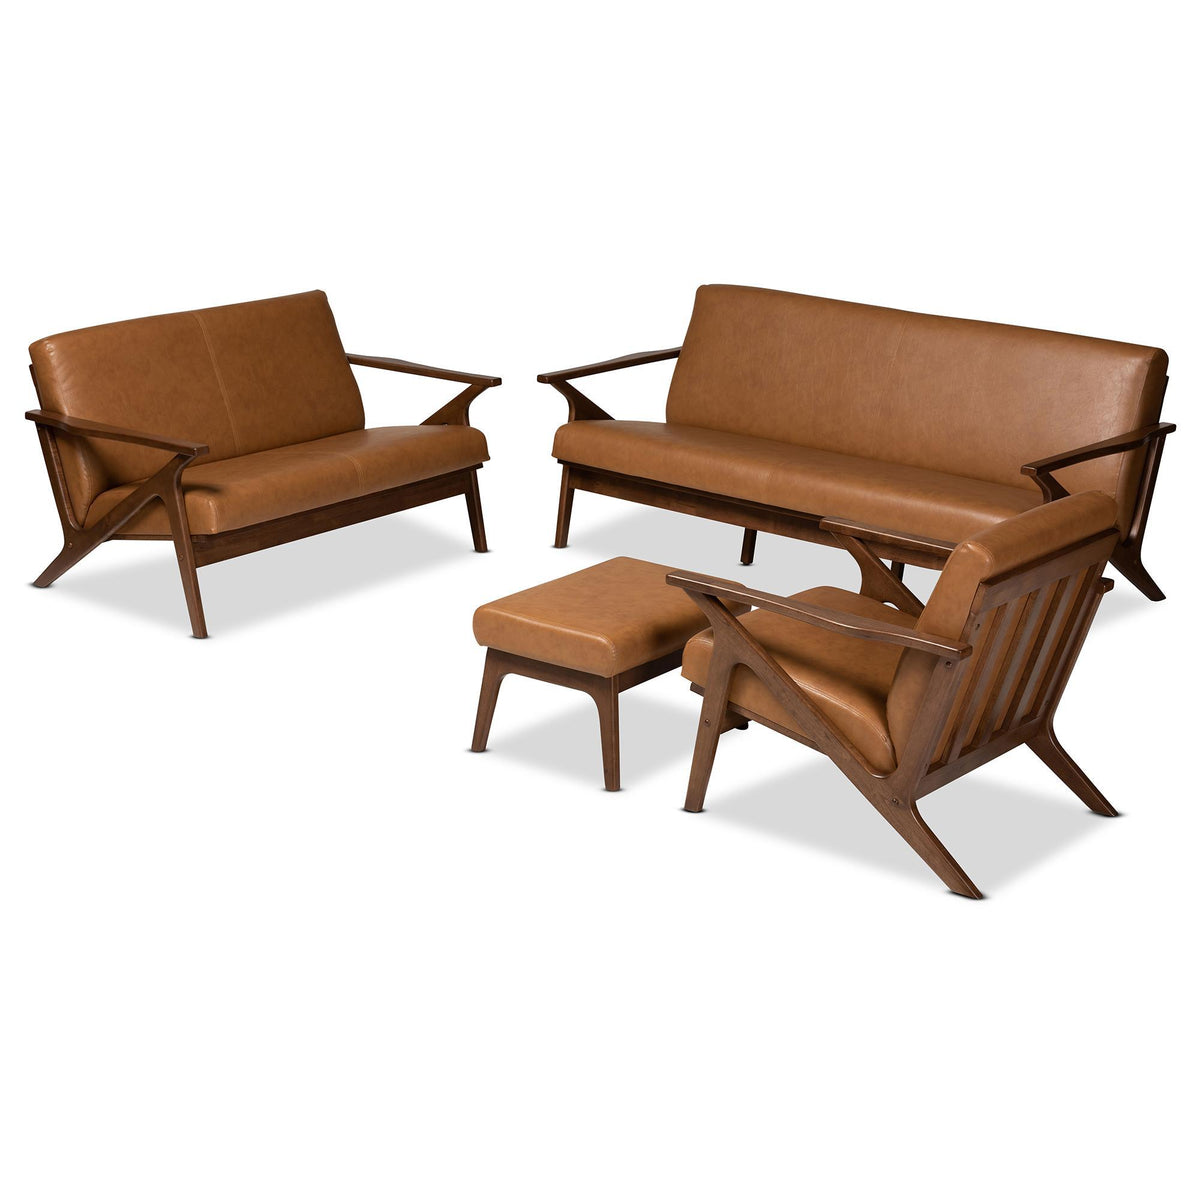 Baxton Studio Bianca Mid-Century Modern Walnut Brown Finished Wood And Tan Faux Leather Effect 4-Piece Living Room Set - Bianca-Tan/Walnut Brown-4PC Set